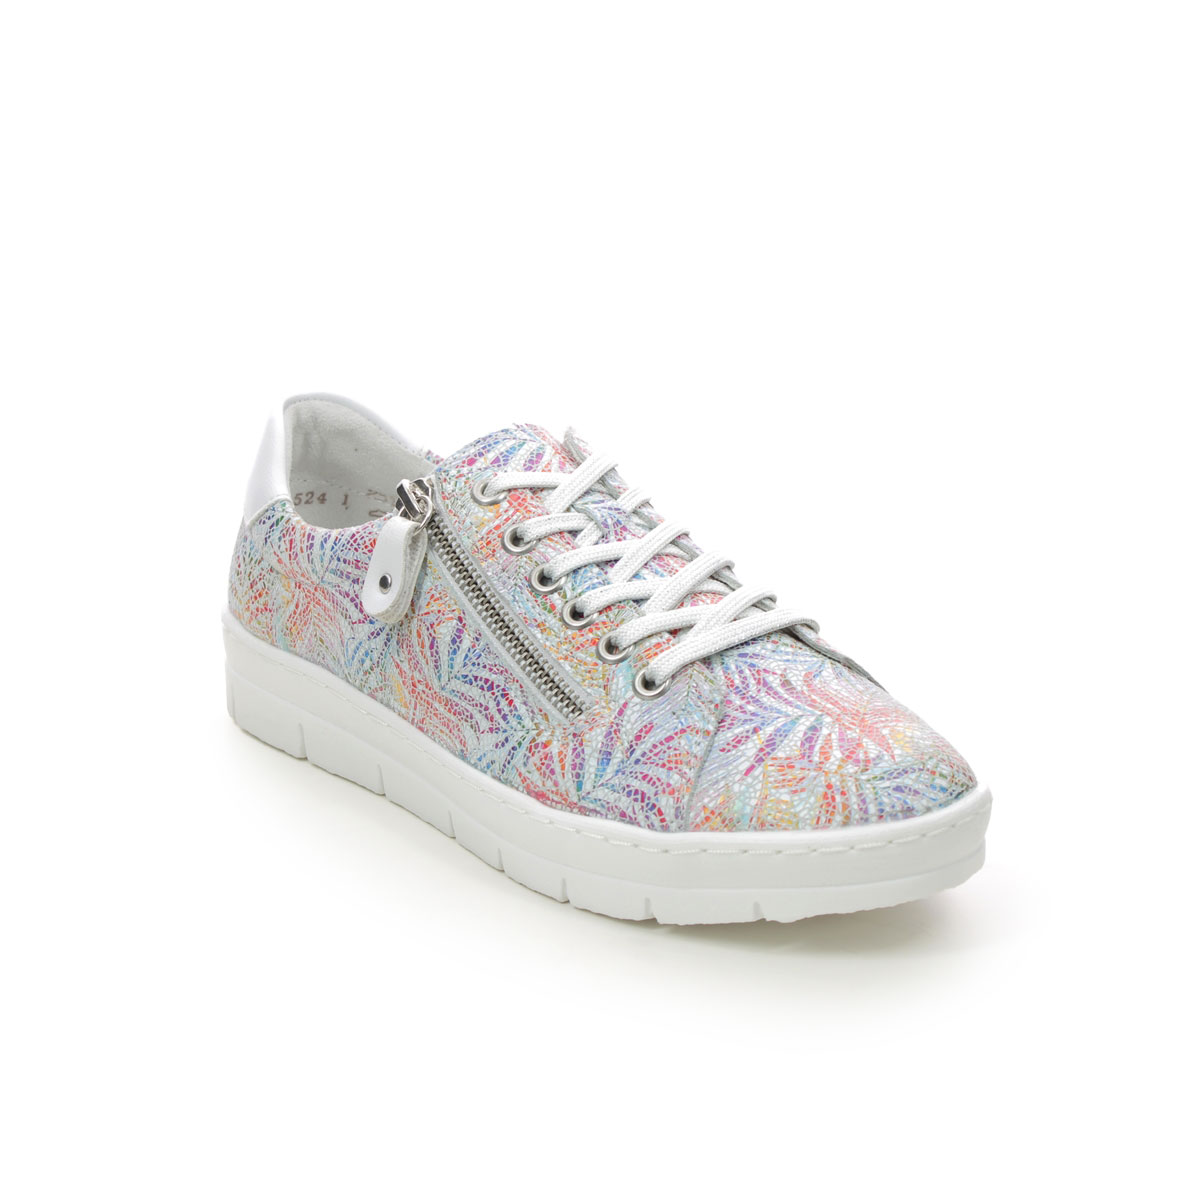 Remonte Ravenna 11 Floral Print Womens Trainers D5800-88 In Size 39 In Plain Floral Print